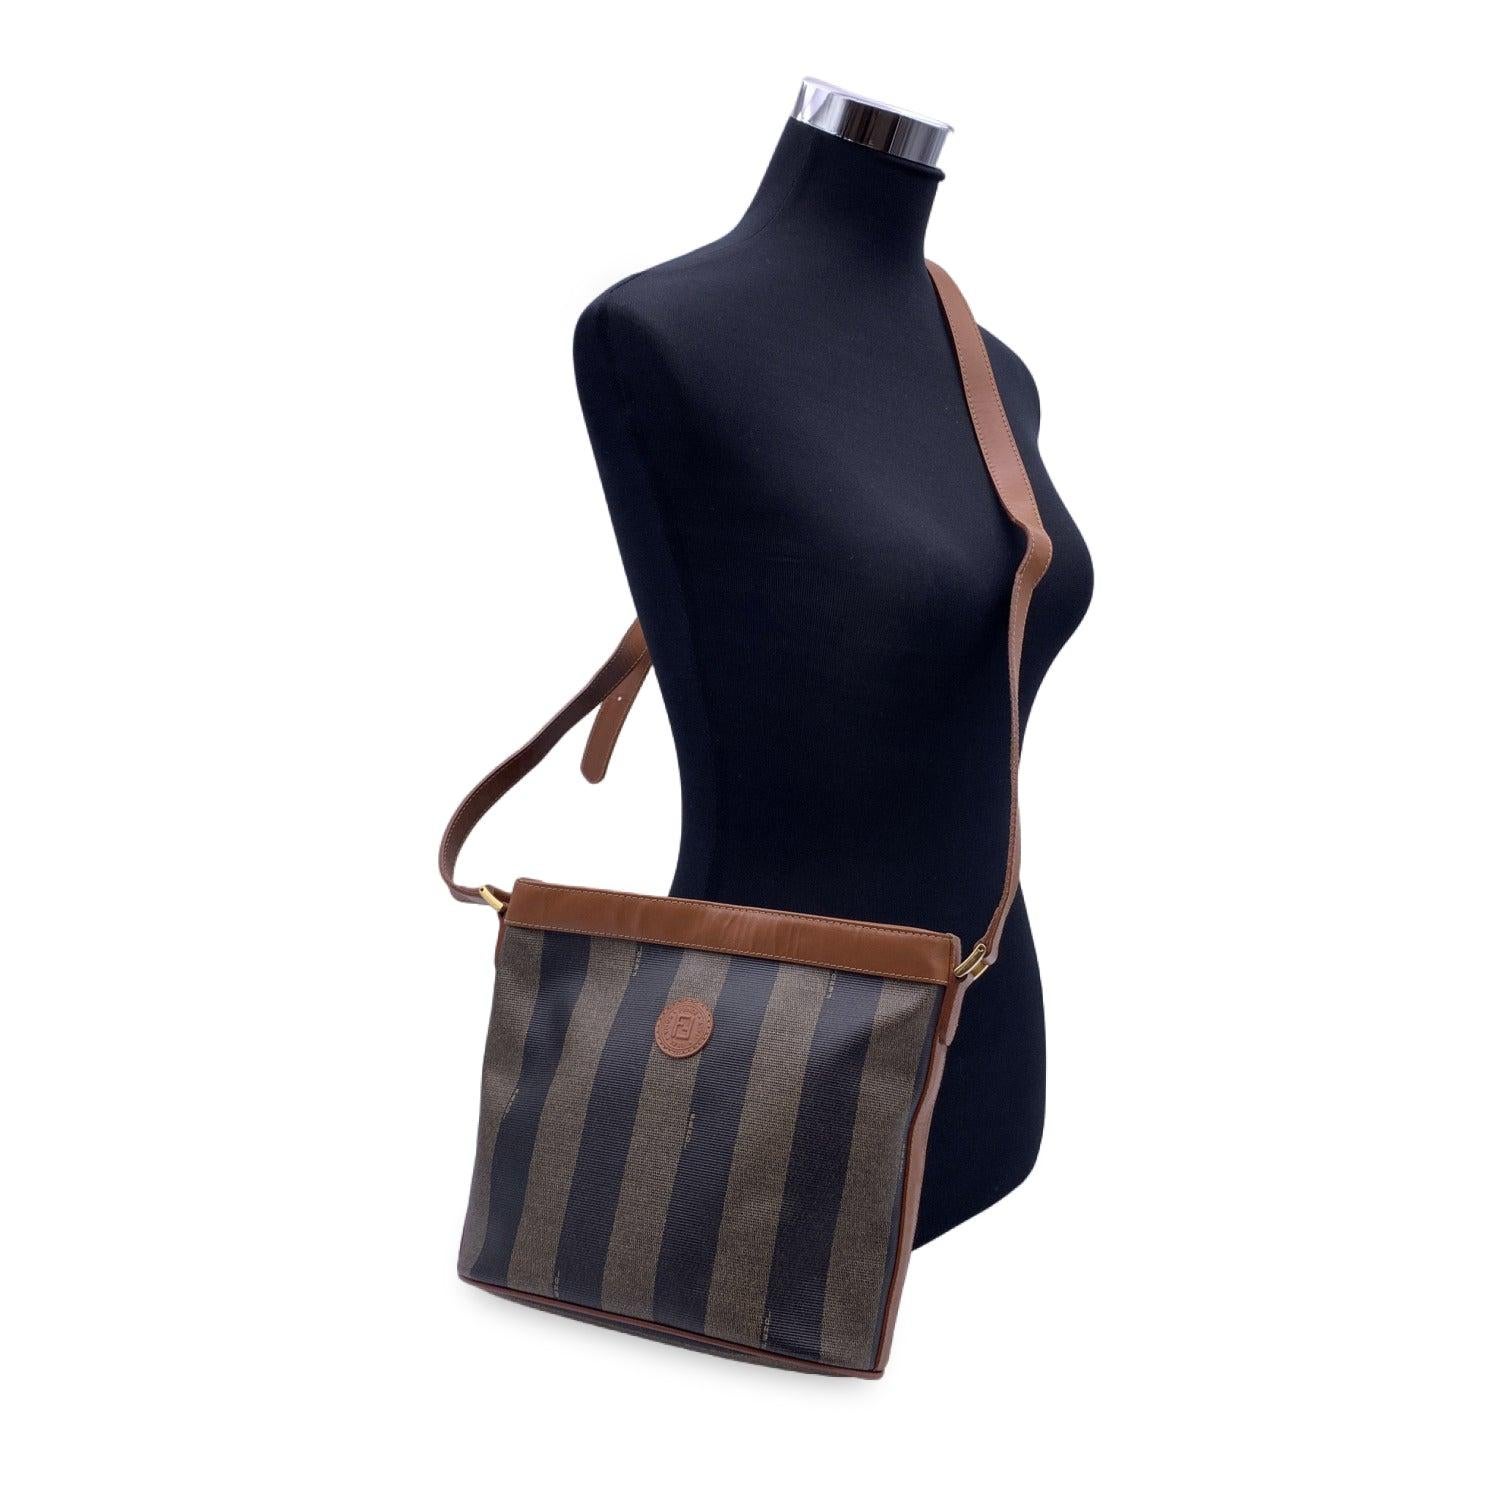 Gorgeous vintage FENDI shoulder bag crafted in striped Pequin canvas with tan leather trim and shoulder strap. Upper zipper closure. Black fabric lining with 1 side zip pocket inside. 'Fendi - Made in Italy' tag inside. 1 side zip pocket inside.